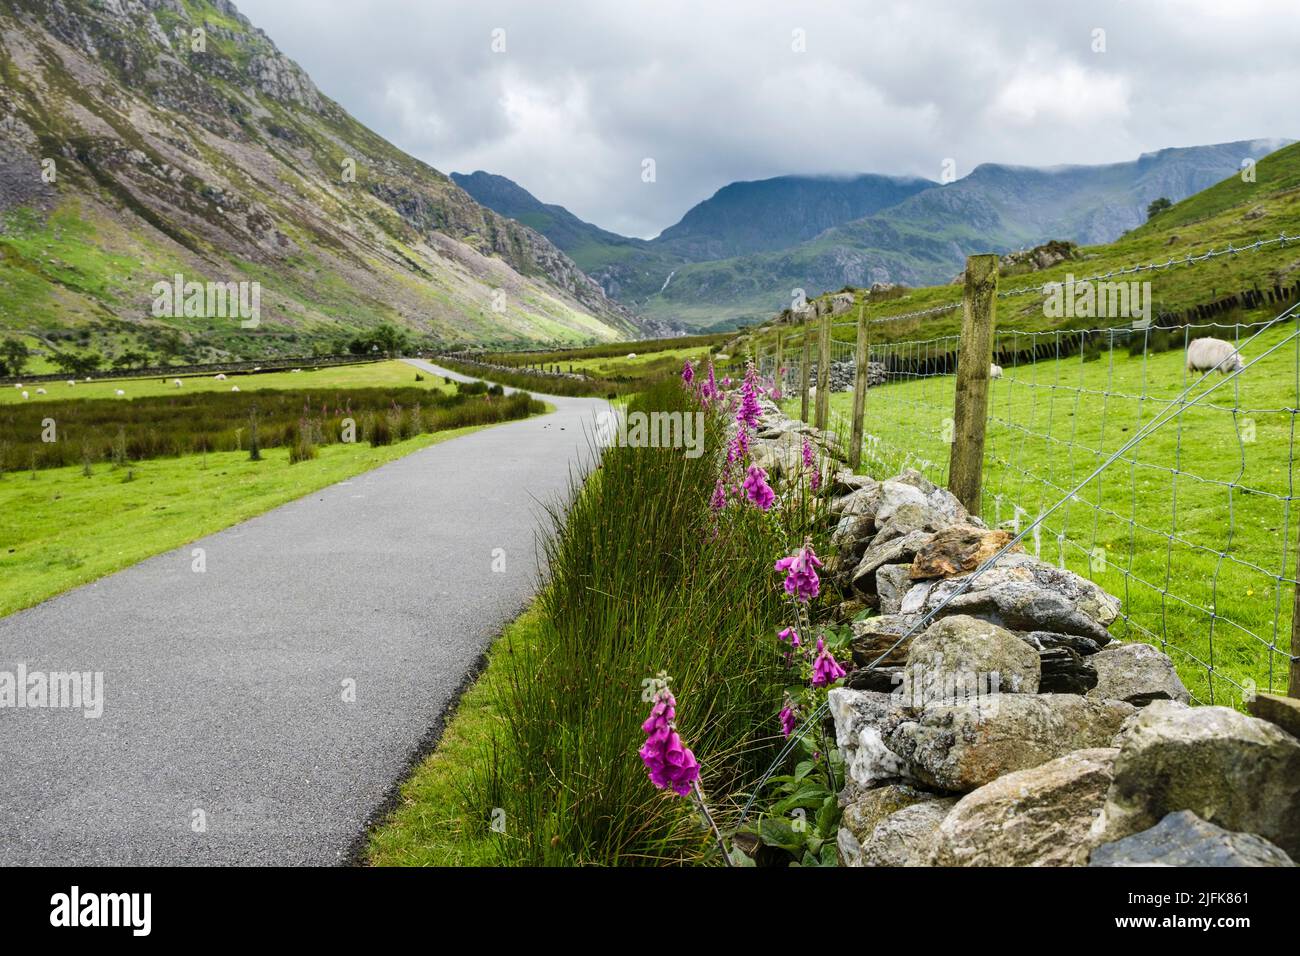 Foxgloves (Digitalis purpurea) flowering by a stone wall on the roadside in Nant Ffrancon with view to mountains in Snowdonia. Gwynedd, Wales, UK Stock Photo